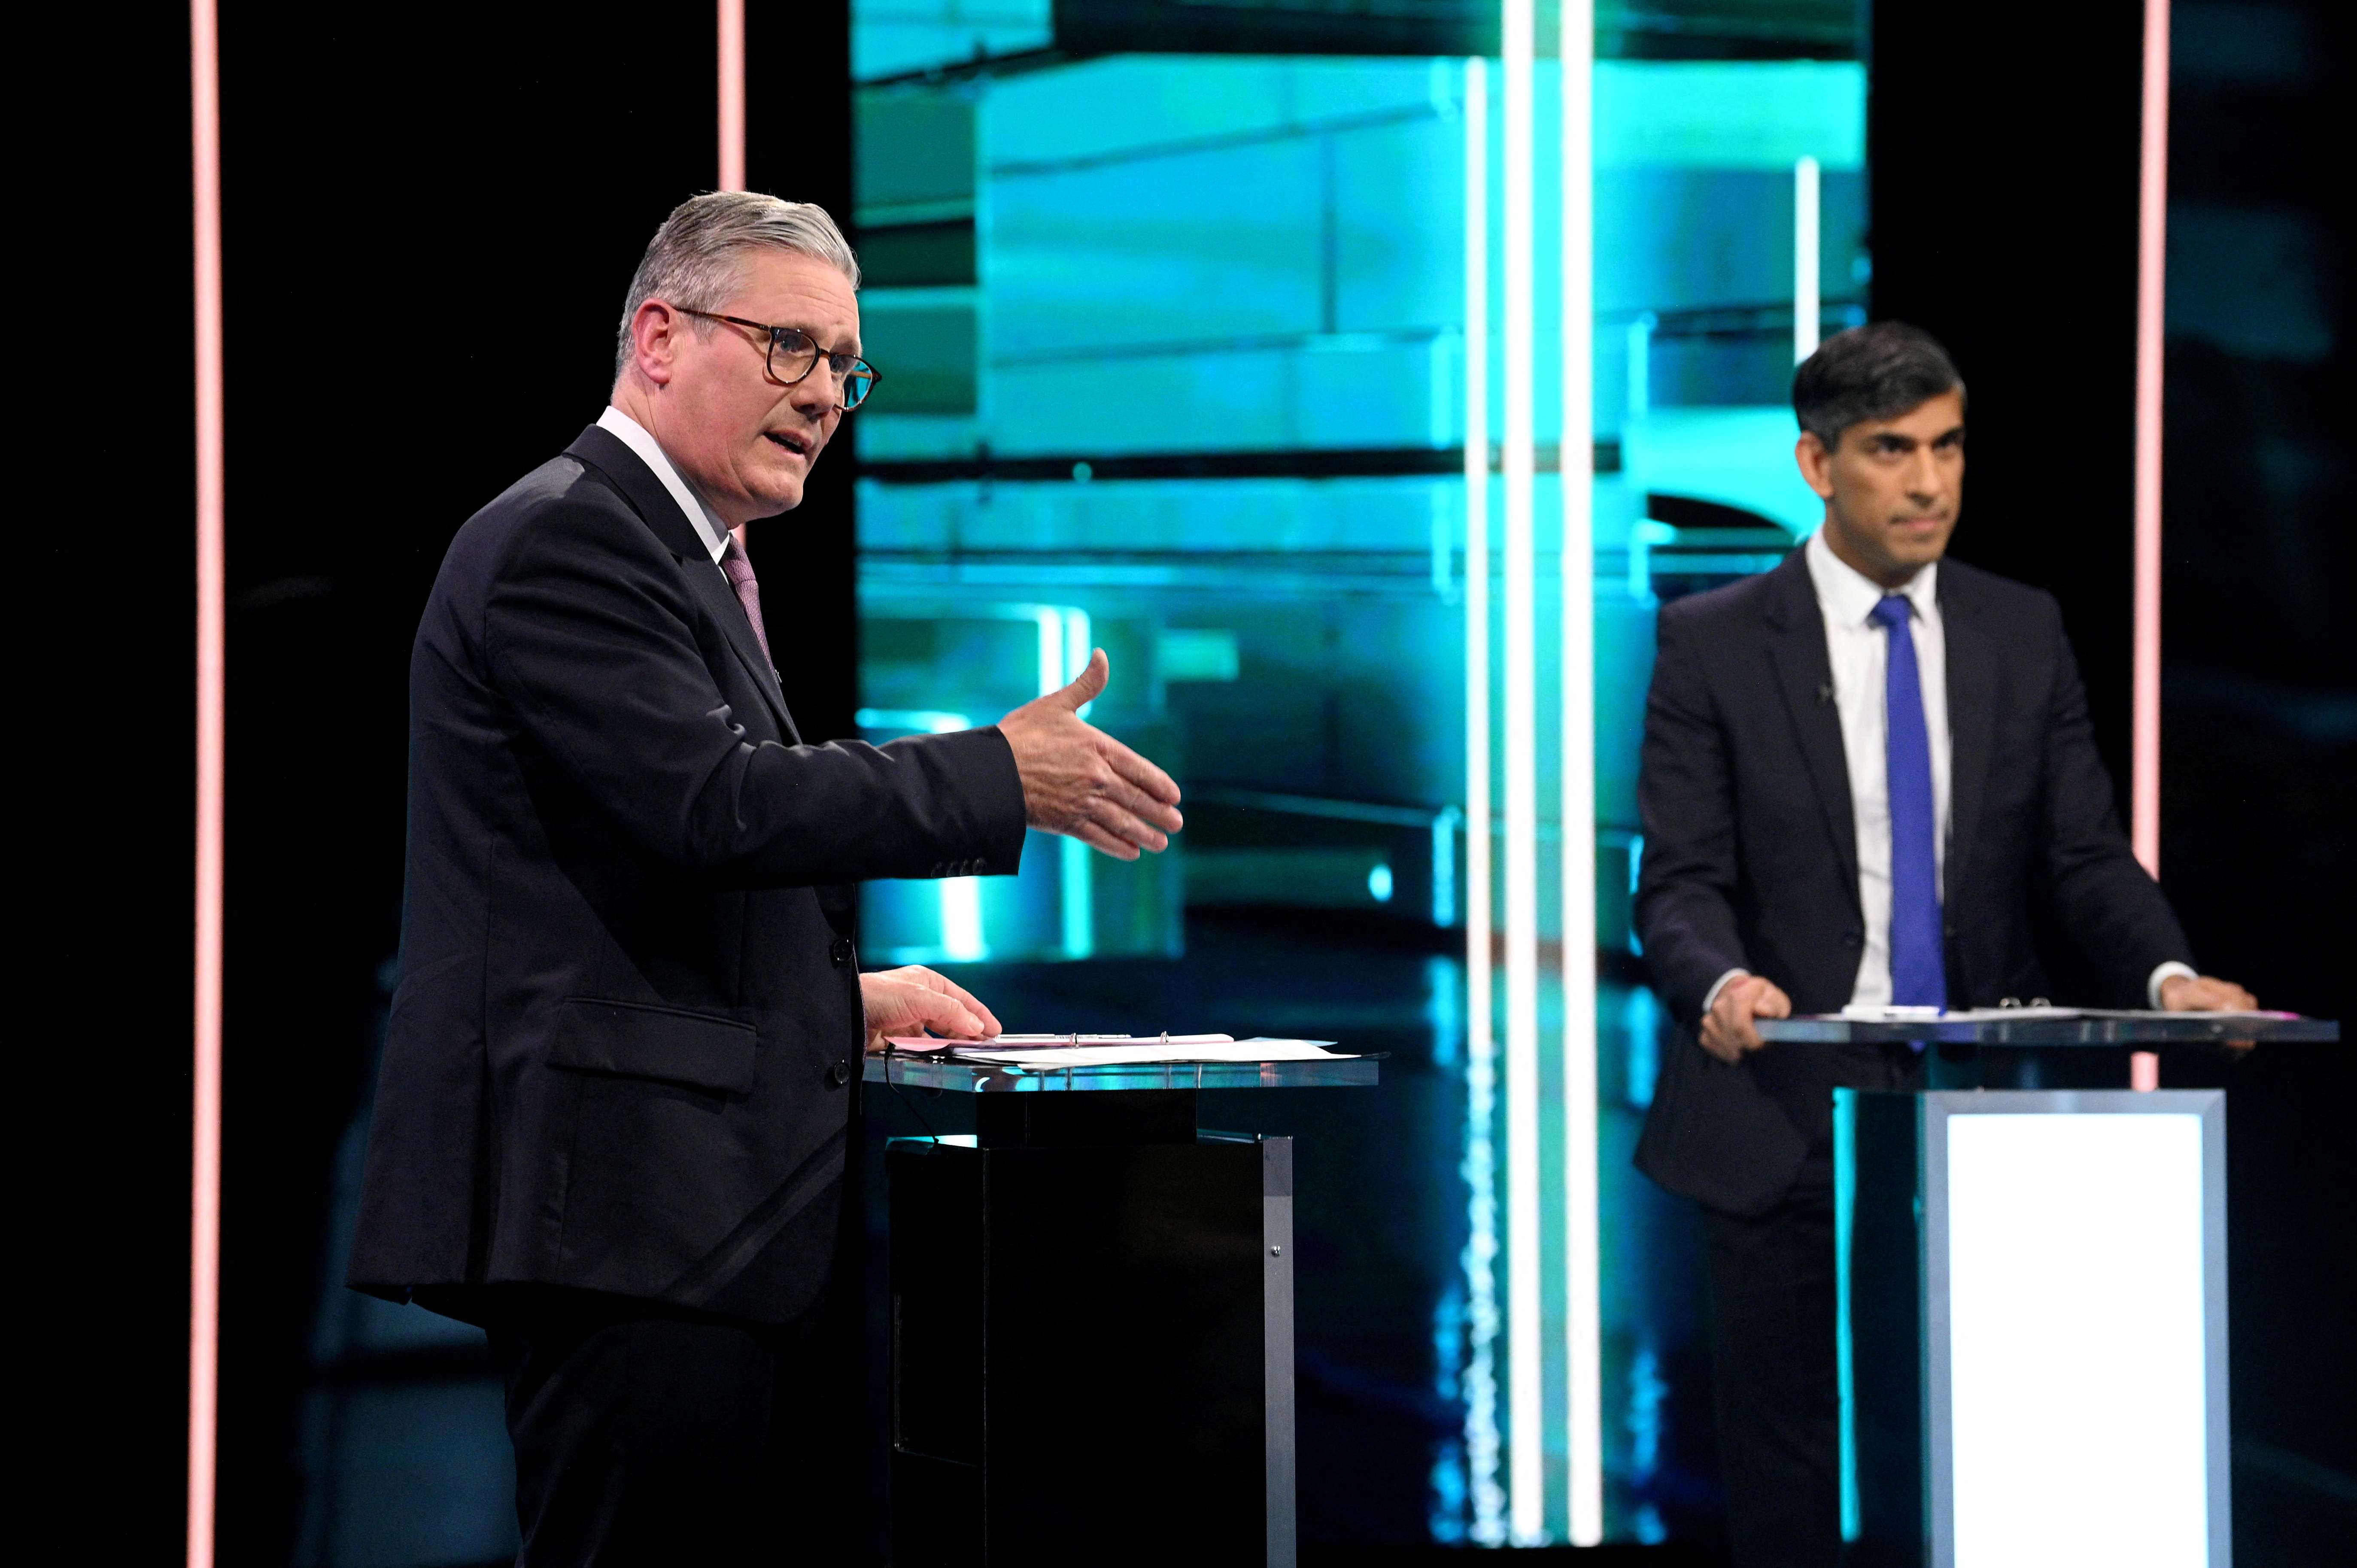 The economy dominates the heated debate between Sunak and Starmer in the UK